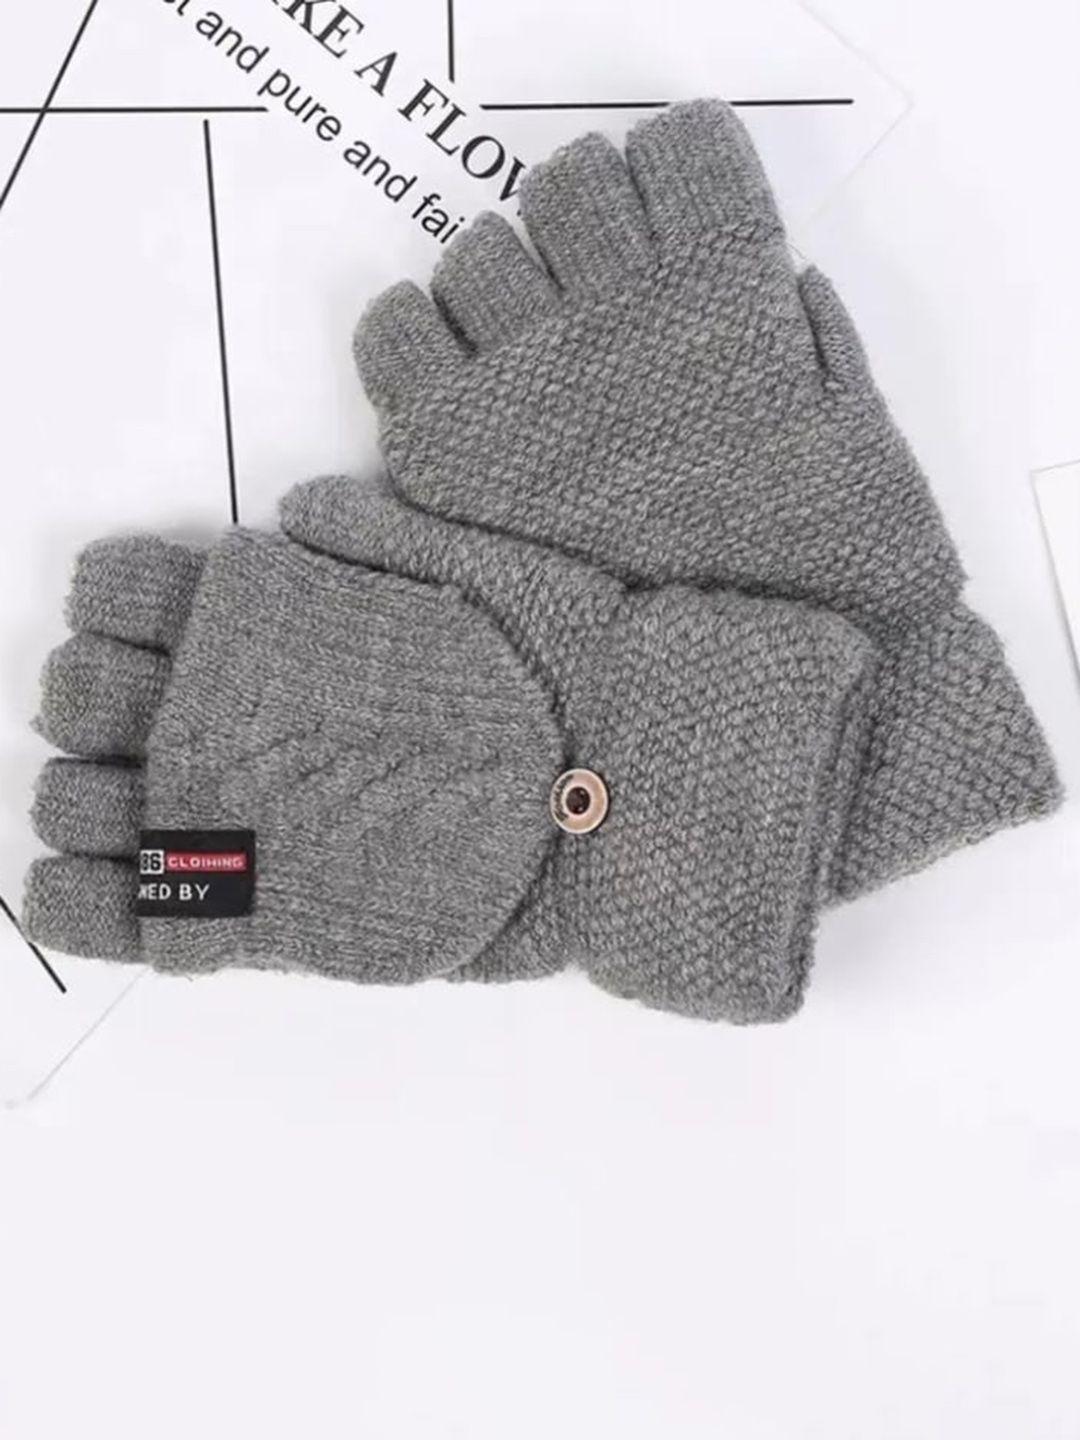 tipy tipy tap girls half finger woolen winter gloves with attached hood